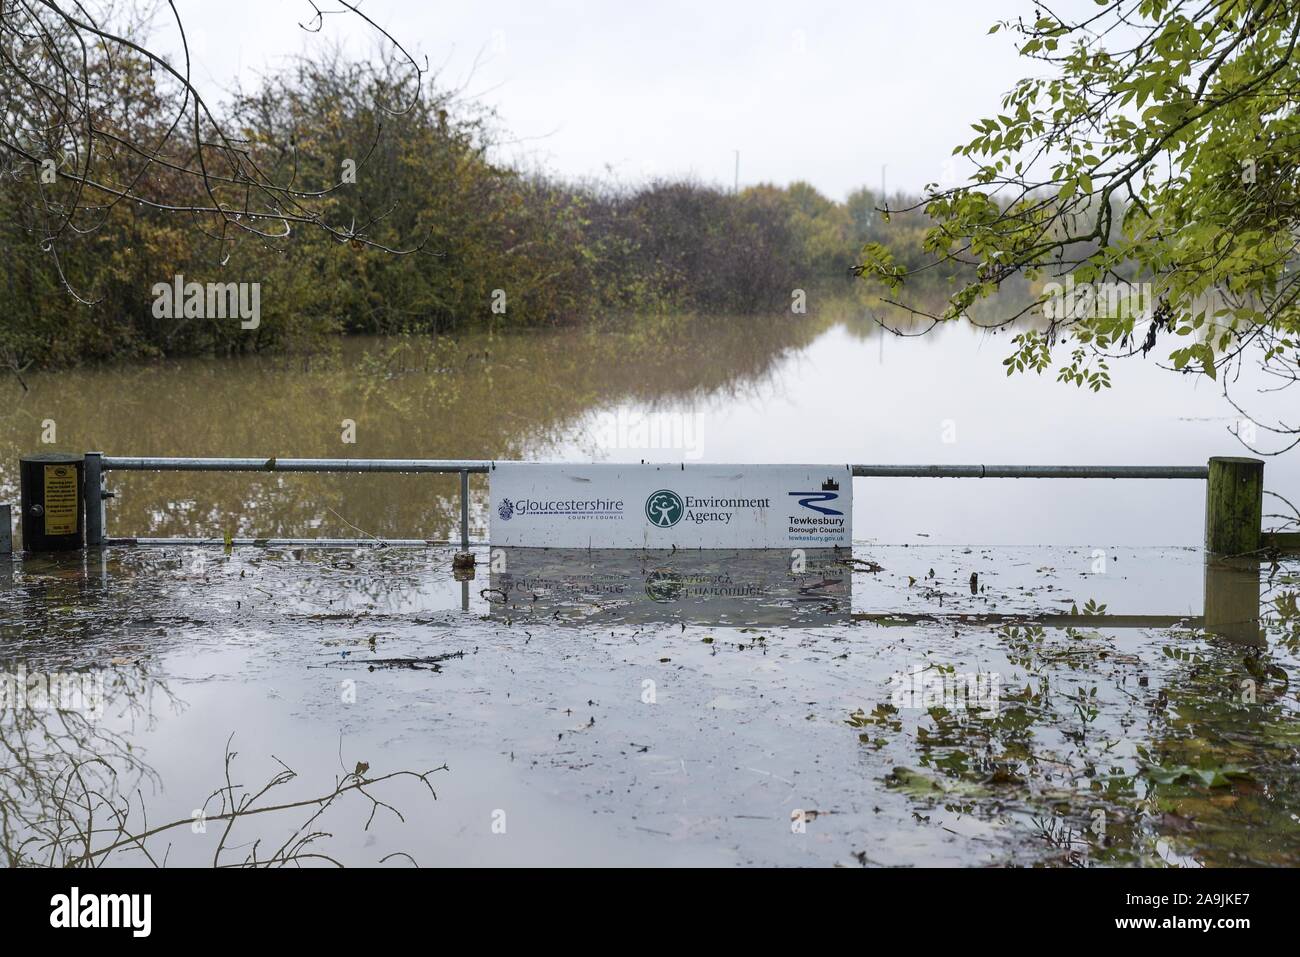 Tewkesbury, Gloucestershire UK. 16th November, 2019. An Environment Agency sign in a flooded field in Tekesbury as the town center has been hit by severe flooding as the River Avon has burst its banks. River levels continue to rise and are expected to peak at over 12 meters above normal river levels late on Saturday afternoon. Pic taken 16/11/2019. Credit: Sam Holiday/Alamy Live News Stock Photo